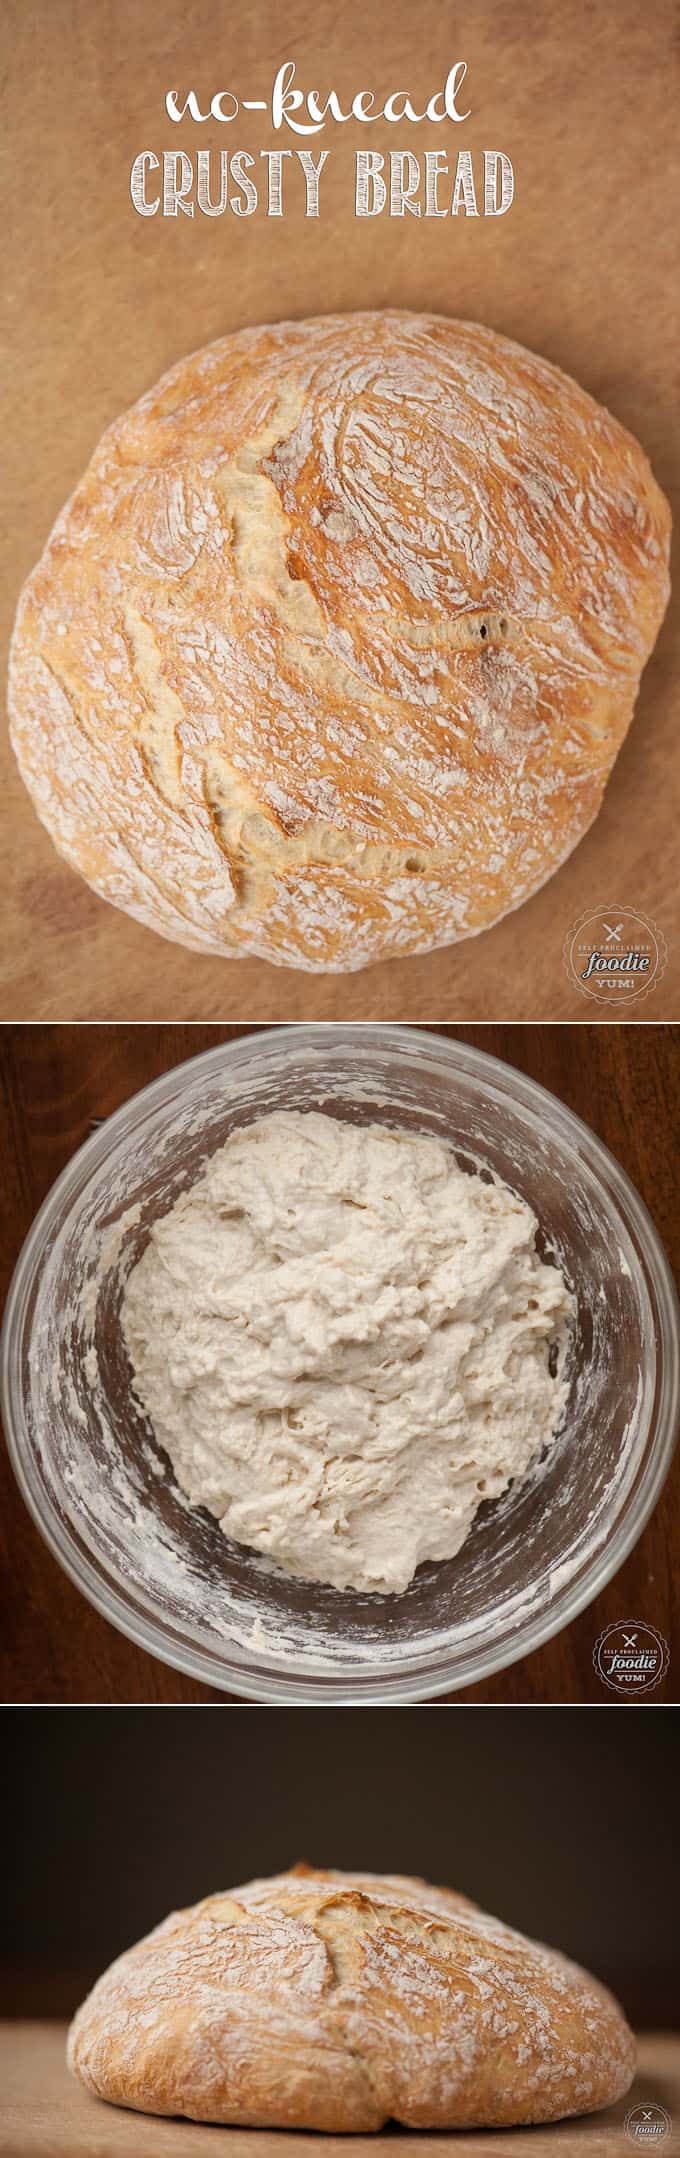 No bread machine or stand mixer needed for this chewy No-Knead Crusty Bread. All you need to make this easy recipe is time and a cast iron dutch oven.